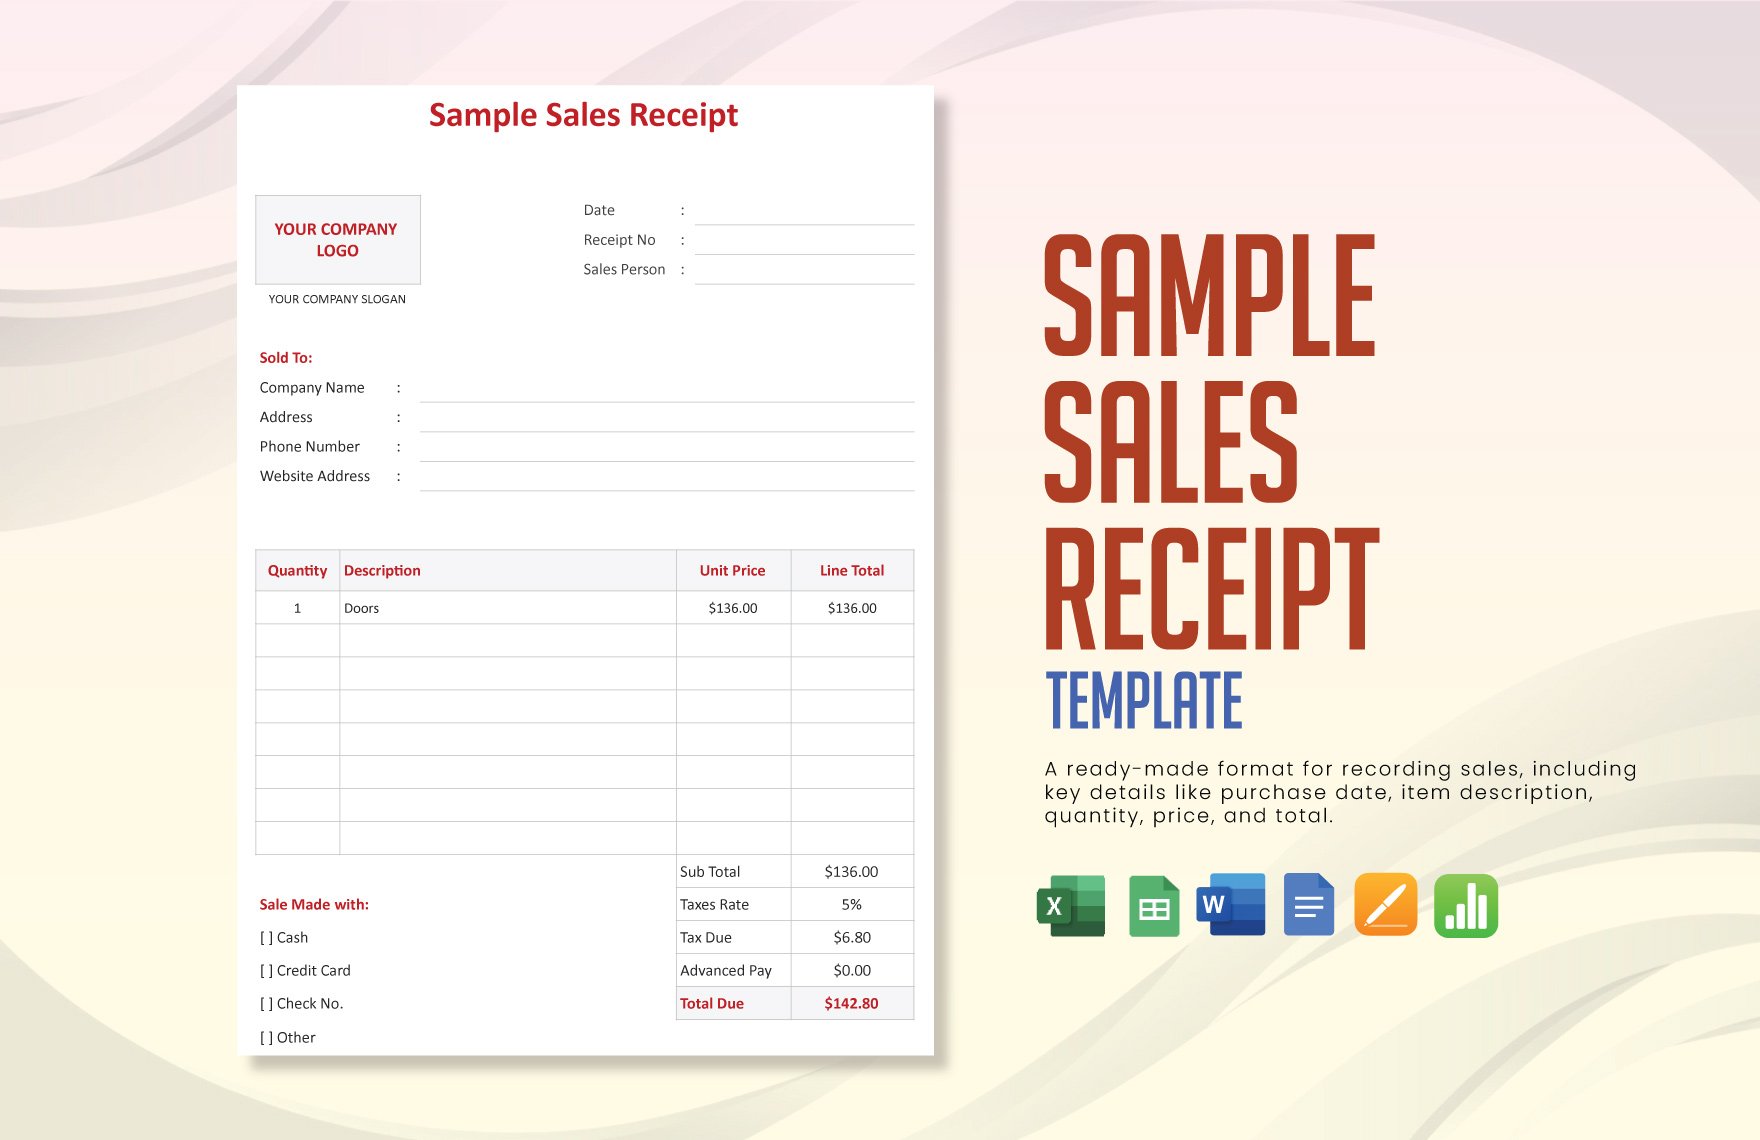 Sample Sales Receipt Template in Word, Google Docs, Excel, Google Sheets, Apple Pages, Apple Numbers